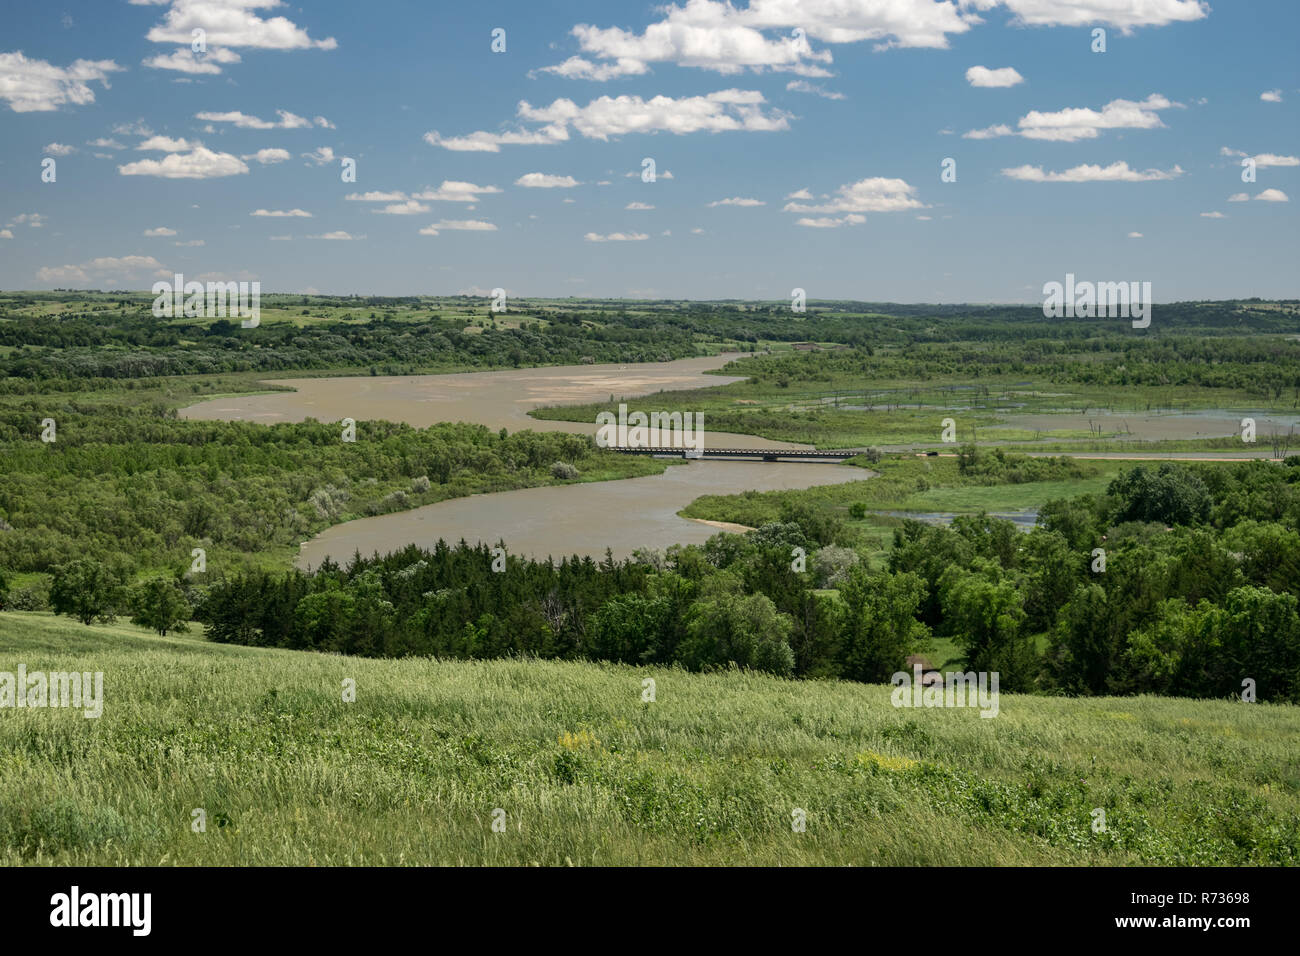 View of the Missouri river from a hill in Niobrara state park. Situated at the confluence of the Niobrara and Missouri rivers on Nebraska`s NE border. Stock Photo